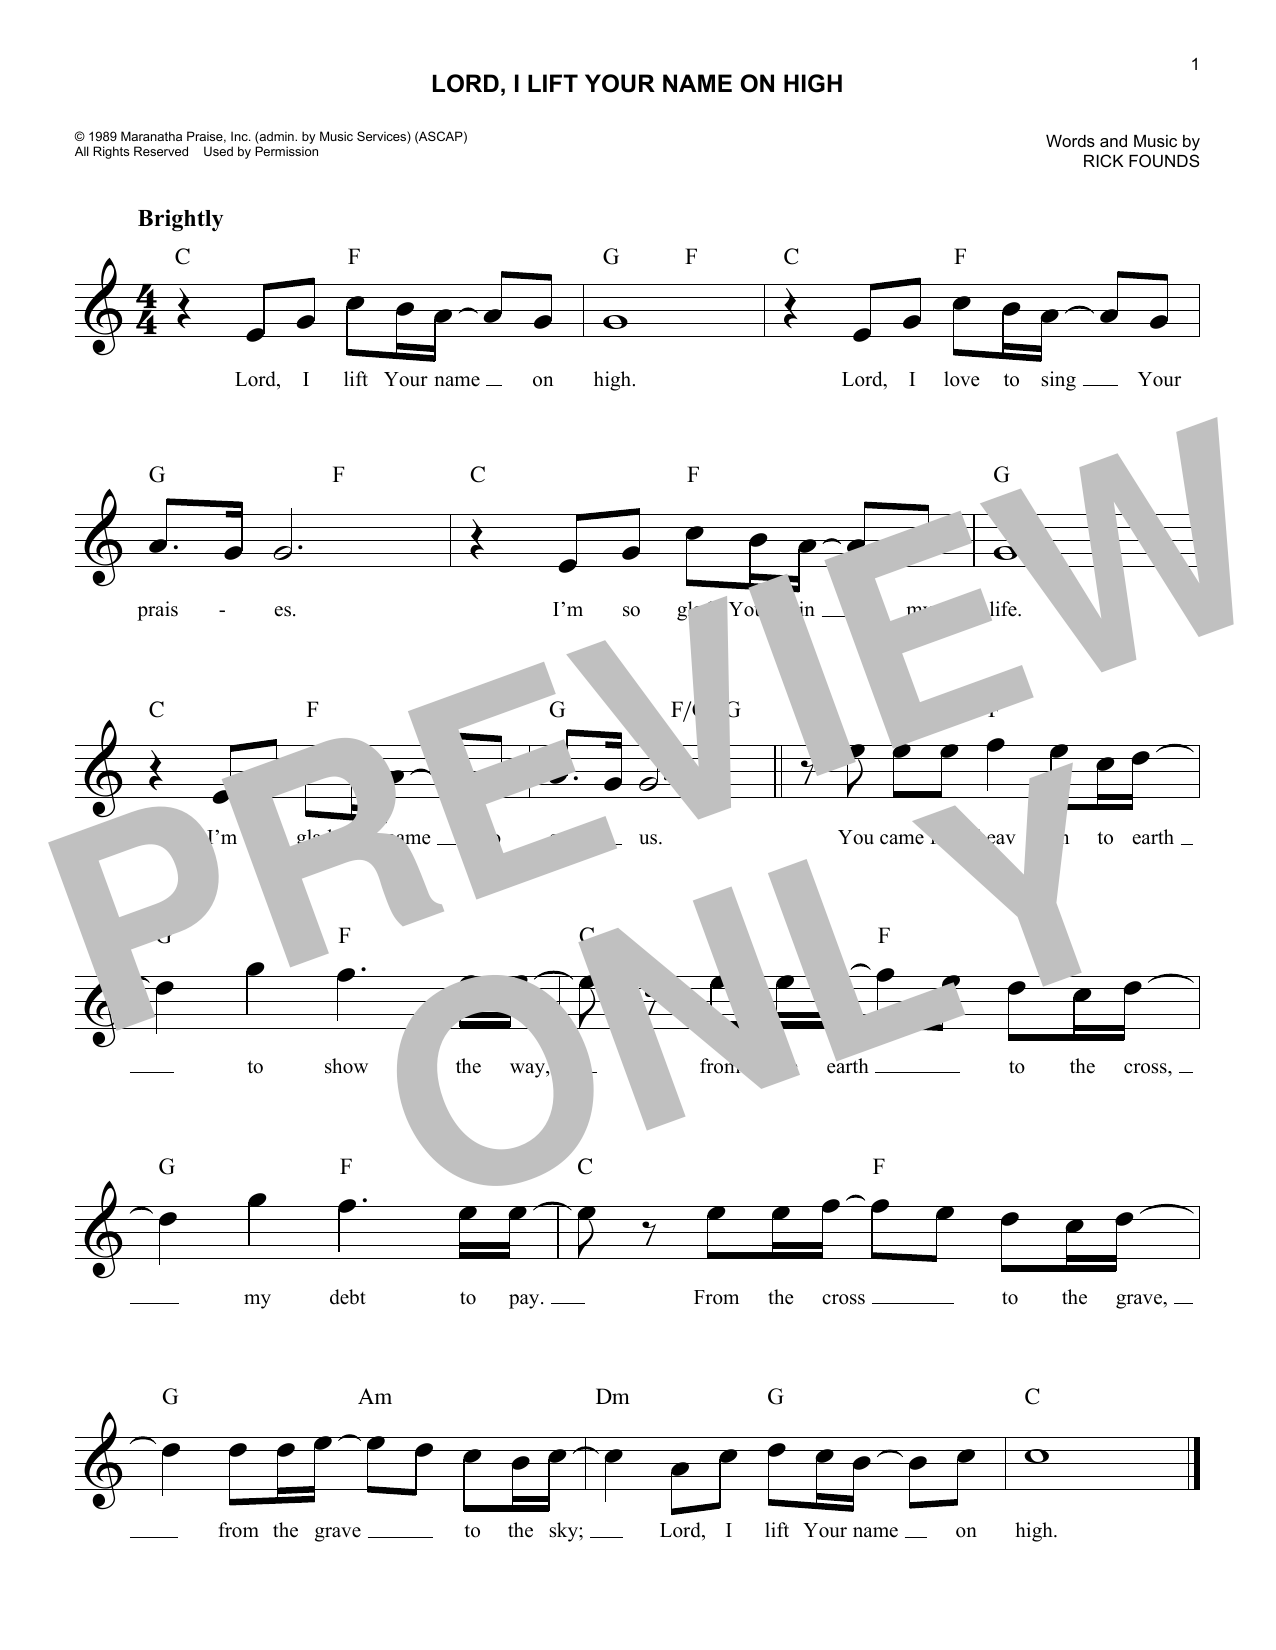 Download Rick Founds Lord, I Lift Your Name On High Sheet Music